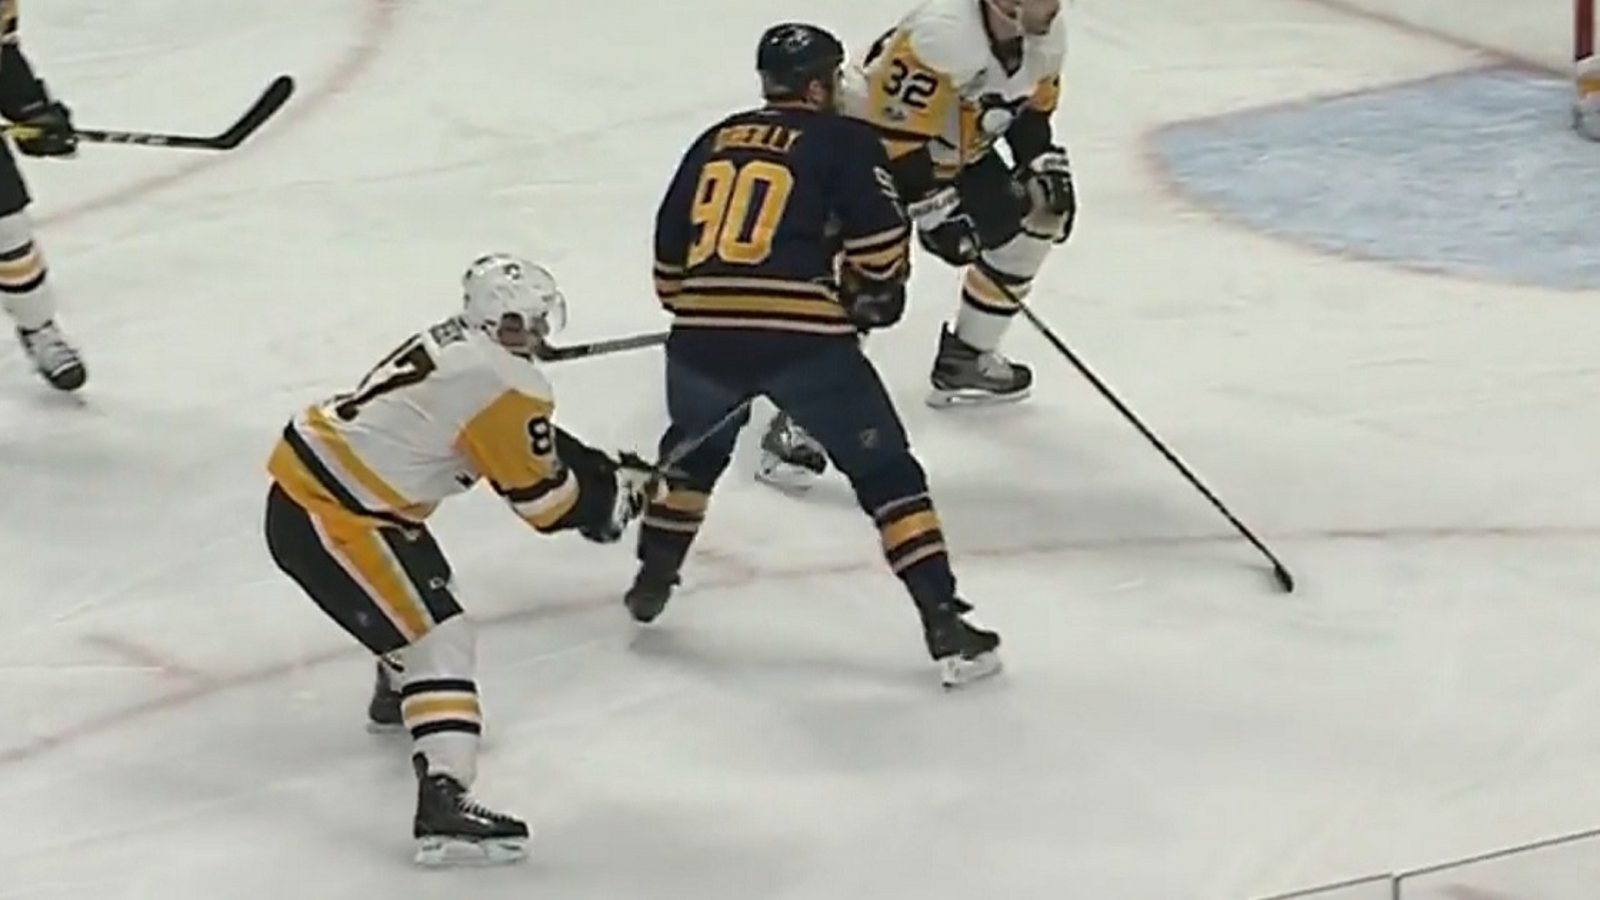 Crosby delivers one of the most blatant cheap shots of the NHL season.